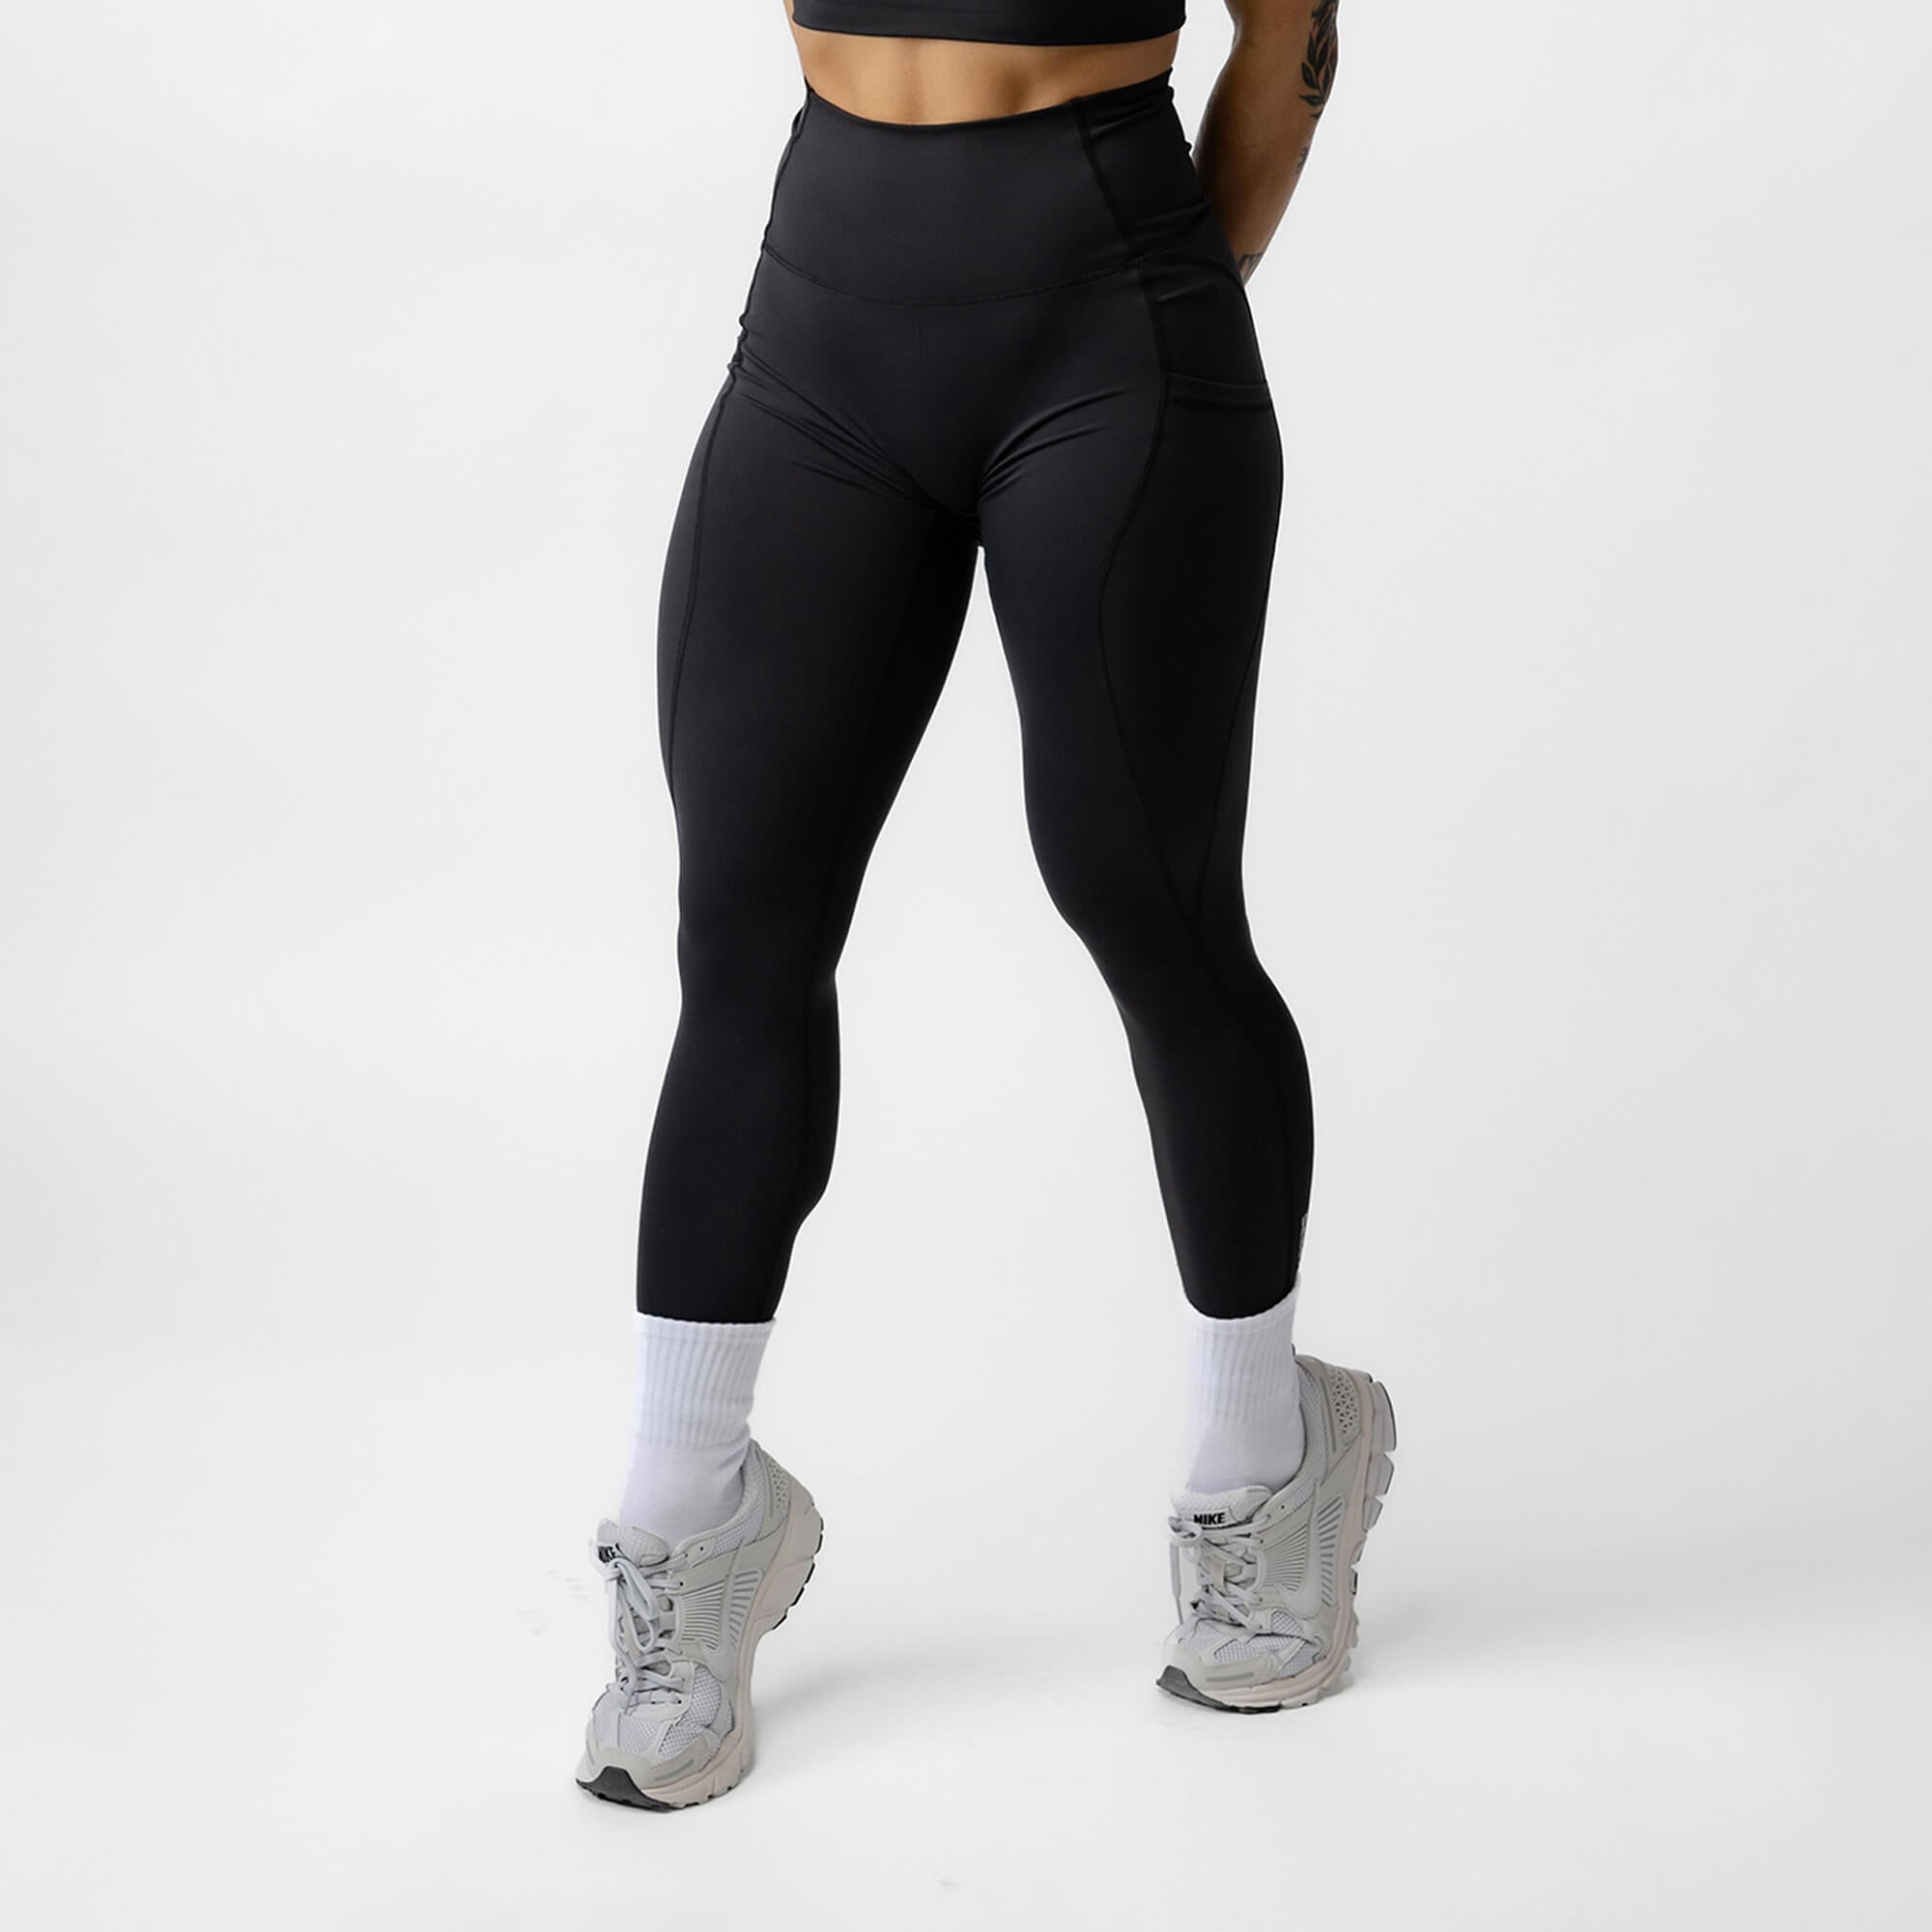 THE GYM PEOPLE Womens V Cross Waist Workout Leggings with